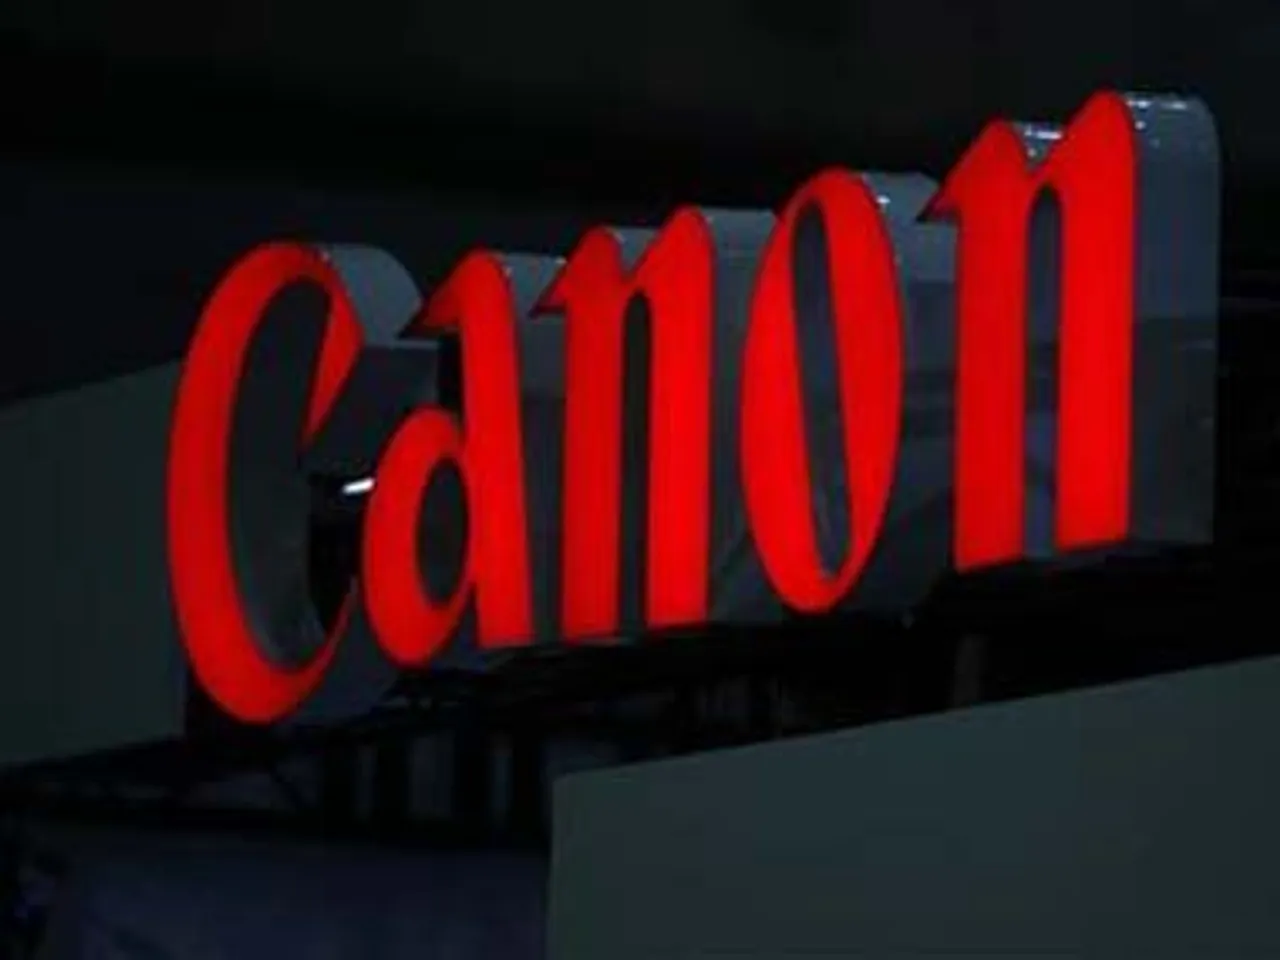 Canon launches new Laser Multi-function printers targeting Enterprise, BFSI, Government and SMBs